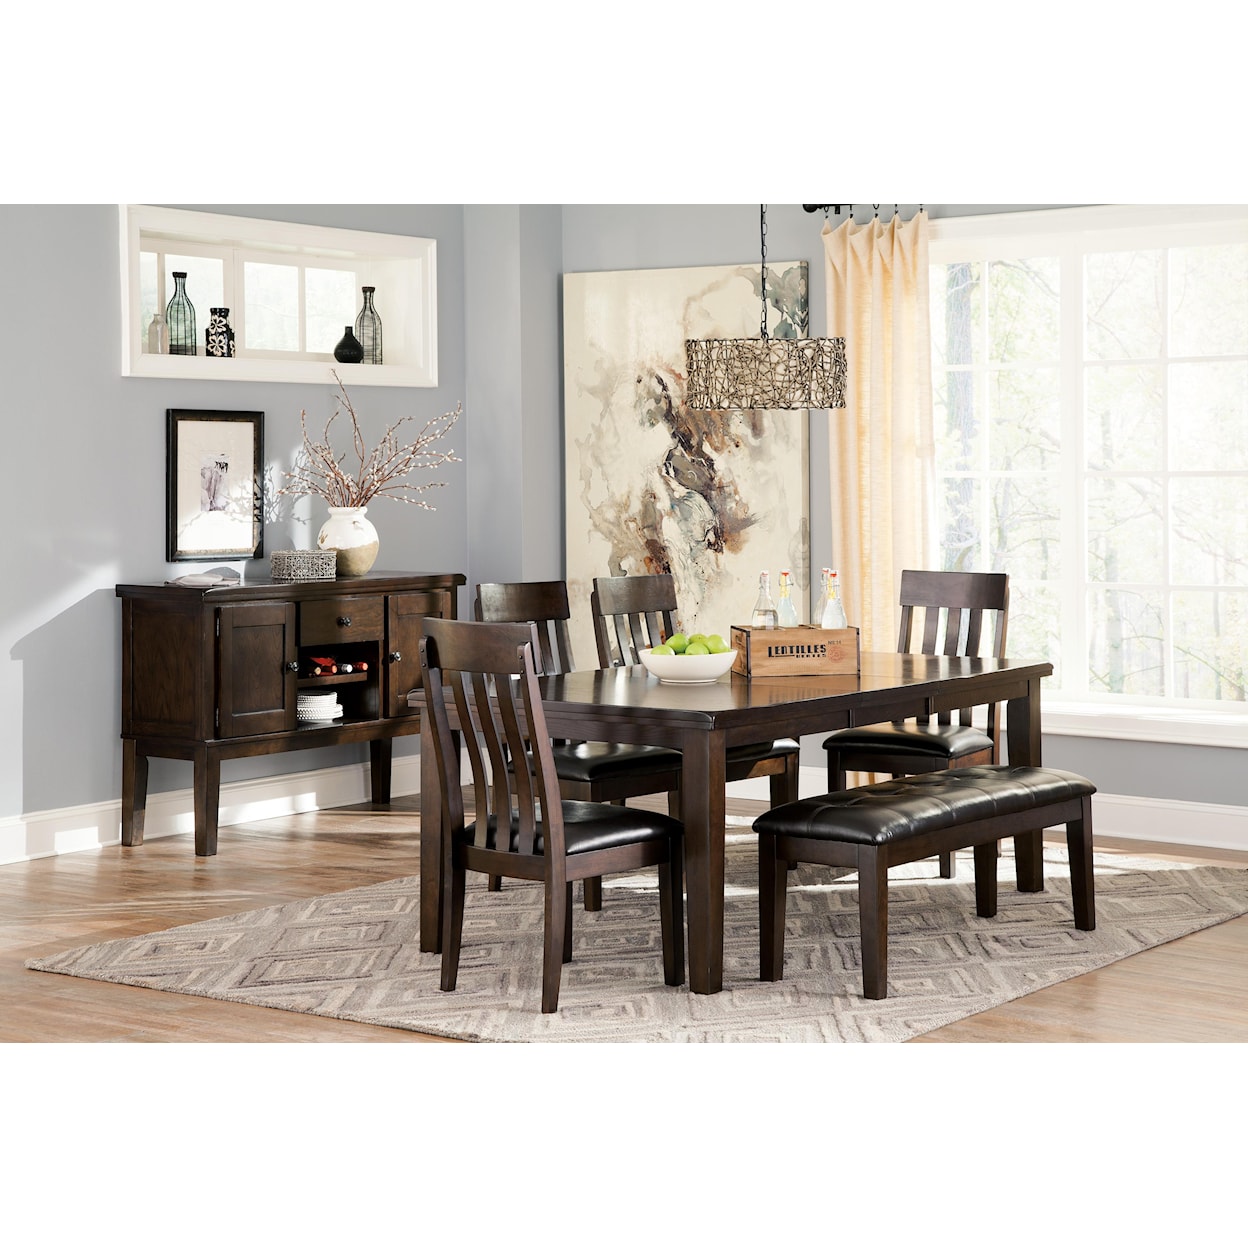 Signature Design by Ashley Furniture Haddigan Formal Dining Room Group